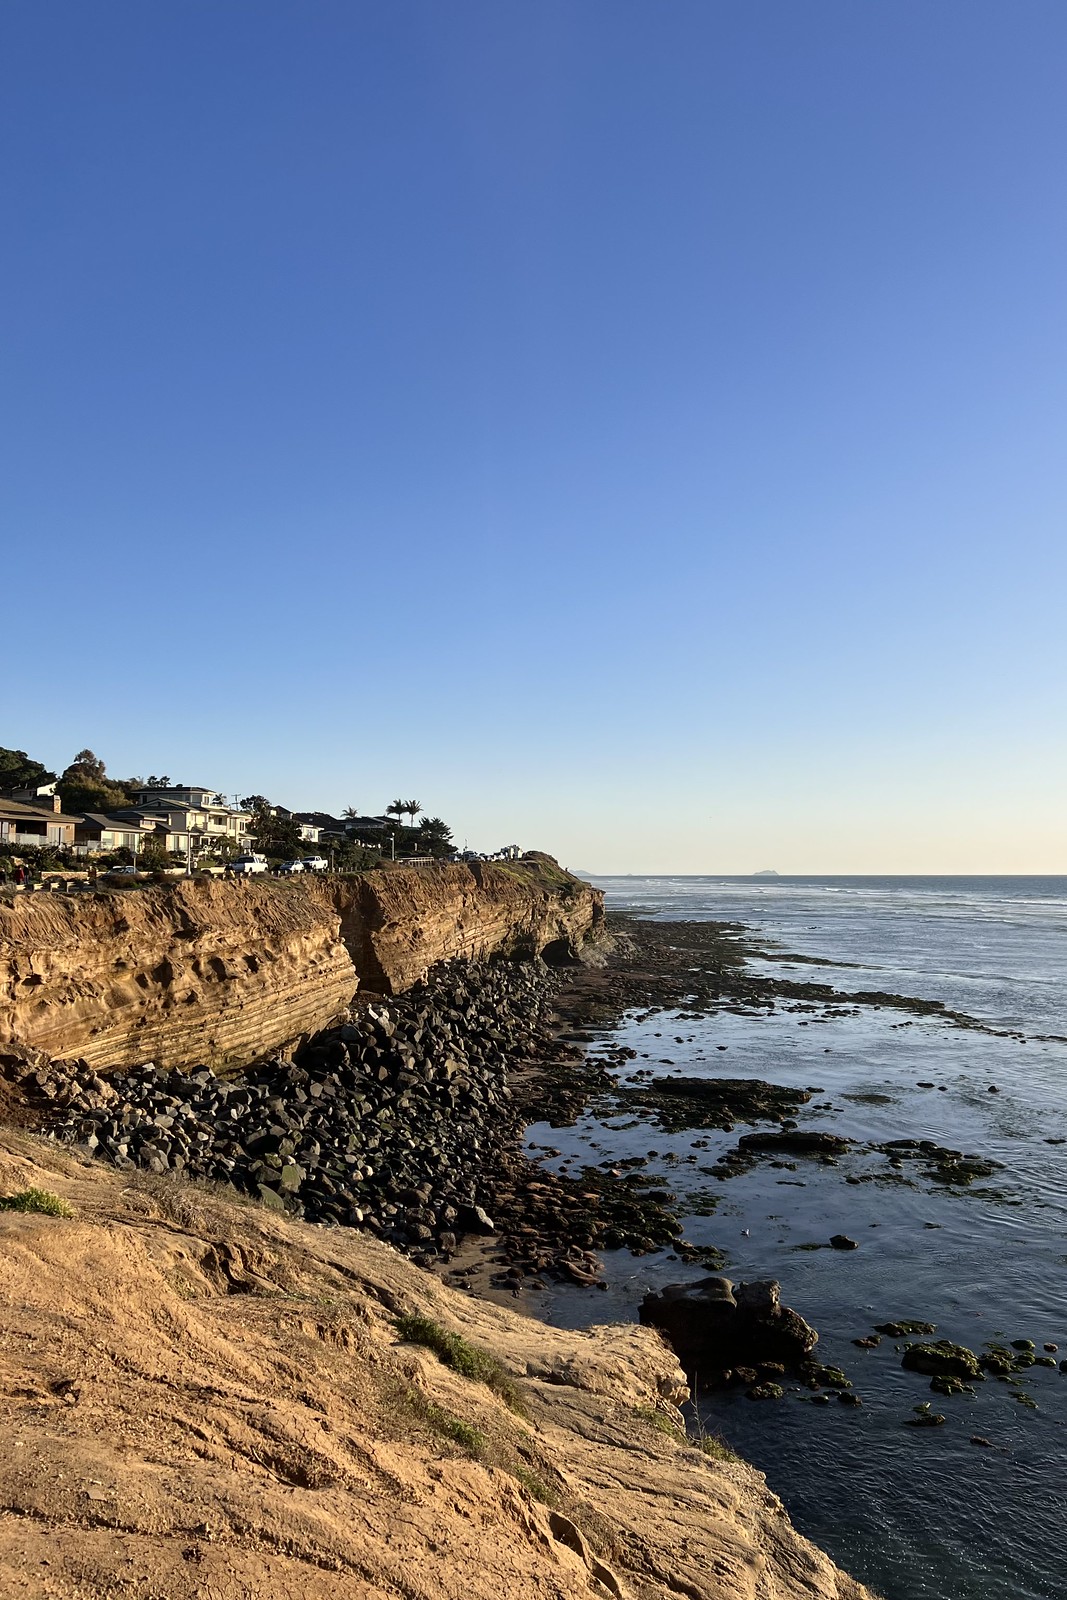 Sunset Cliffs at Golden Hour | 4 Day Itinerary San Diego, CA | What to do, see and eat in San Diego California | San Diego Travel Guide | First Timer's Guide to a Long Weekend in San Diego | Best Things to do in San Diego | Southern California Vacation